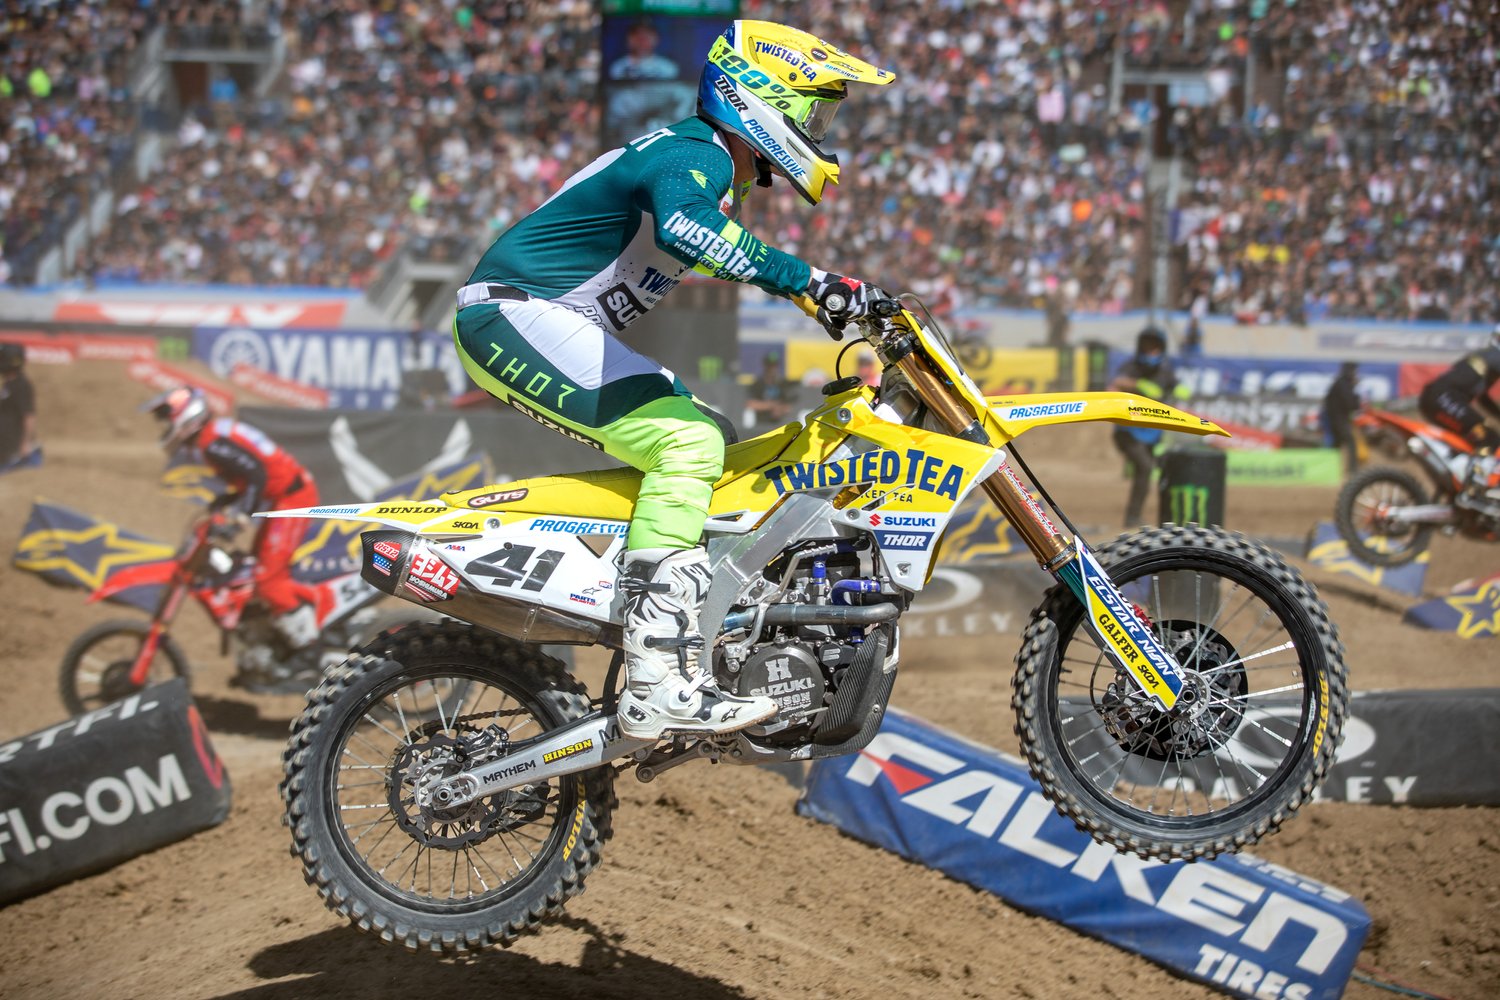 Brandon Hartranft (#41) – finished 11th overall in the 450cc premiere class.